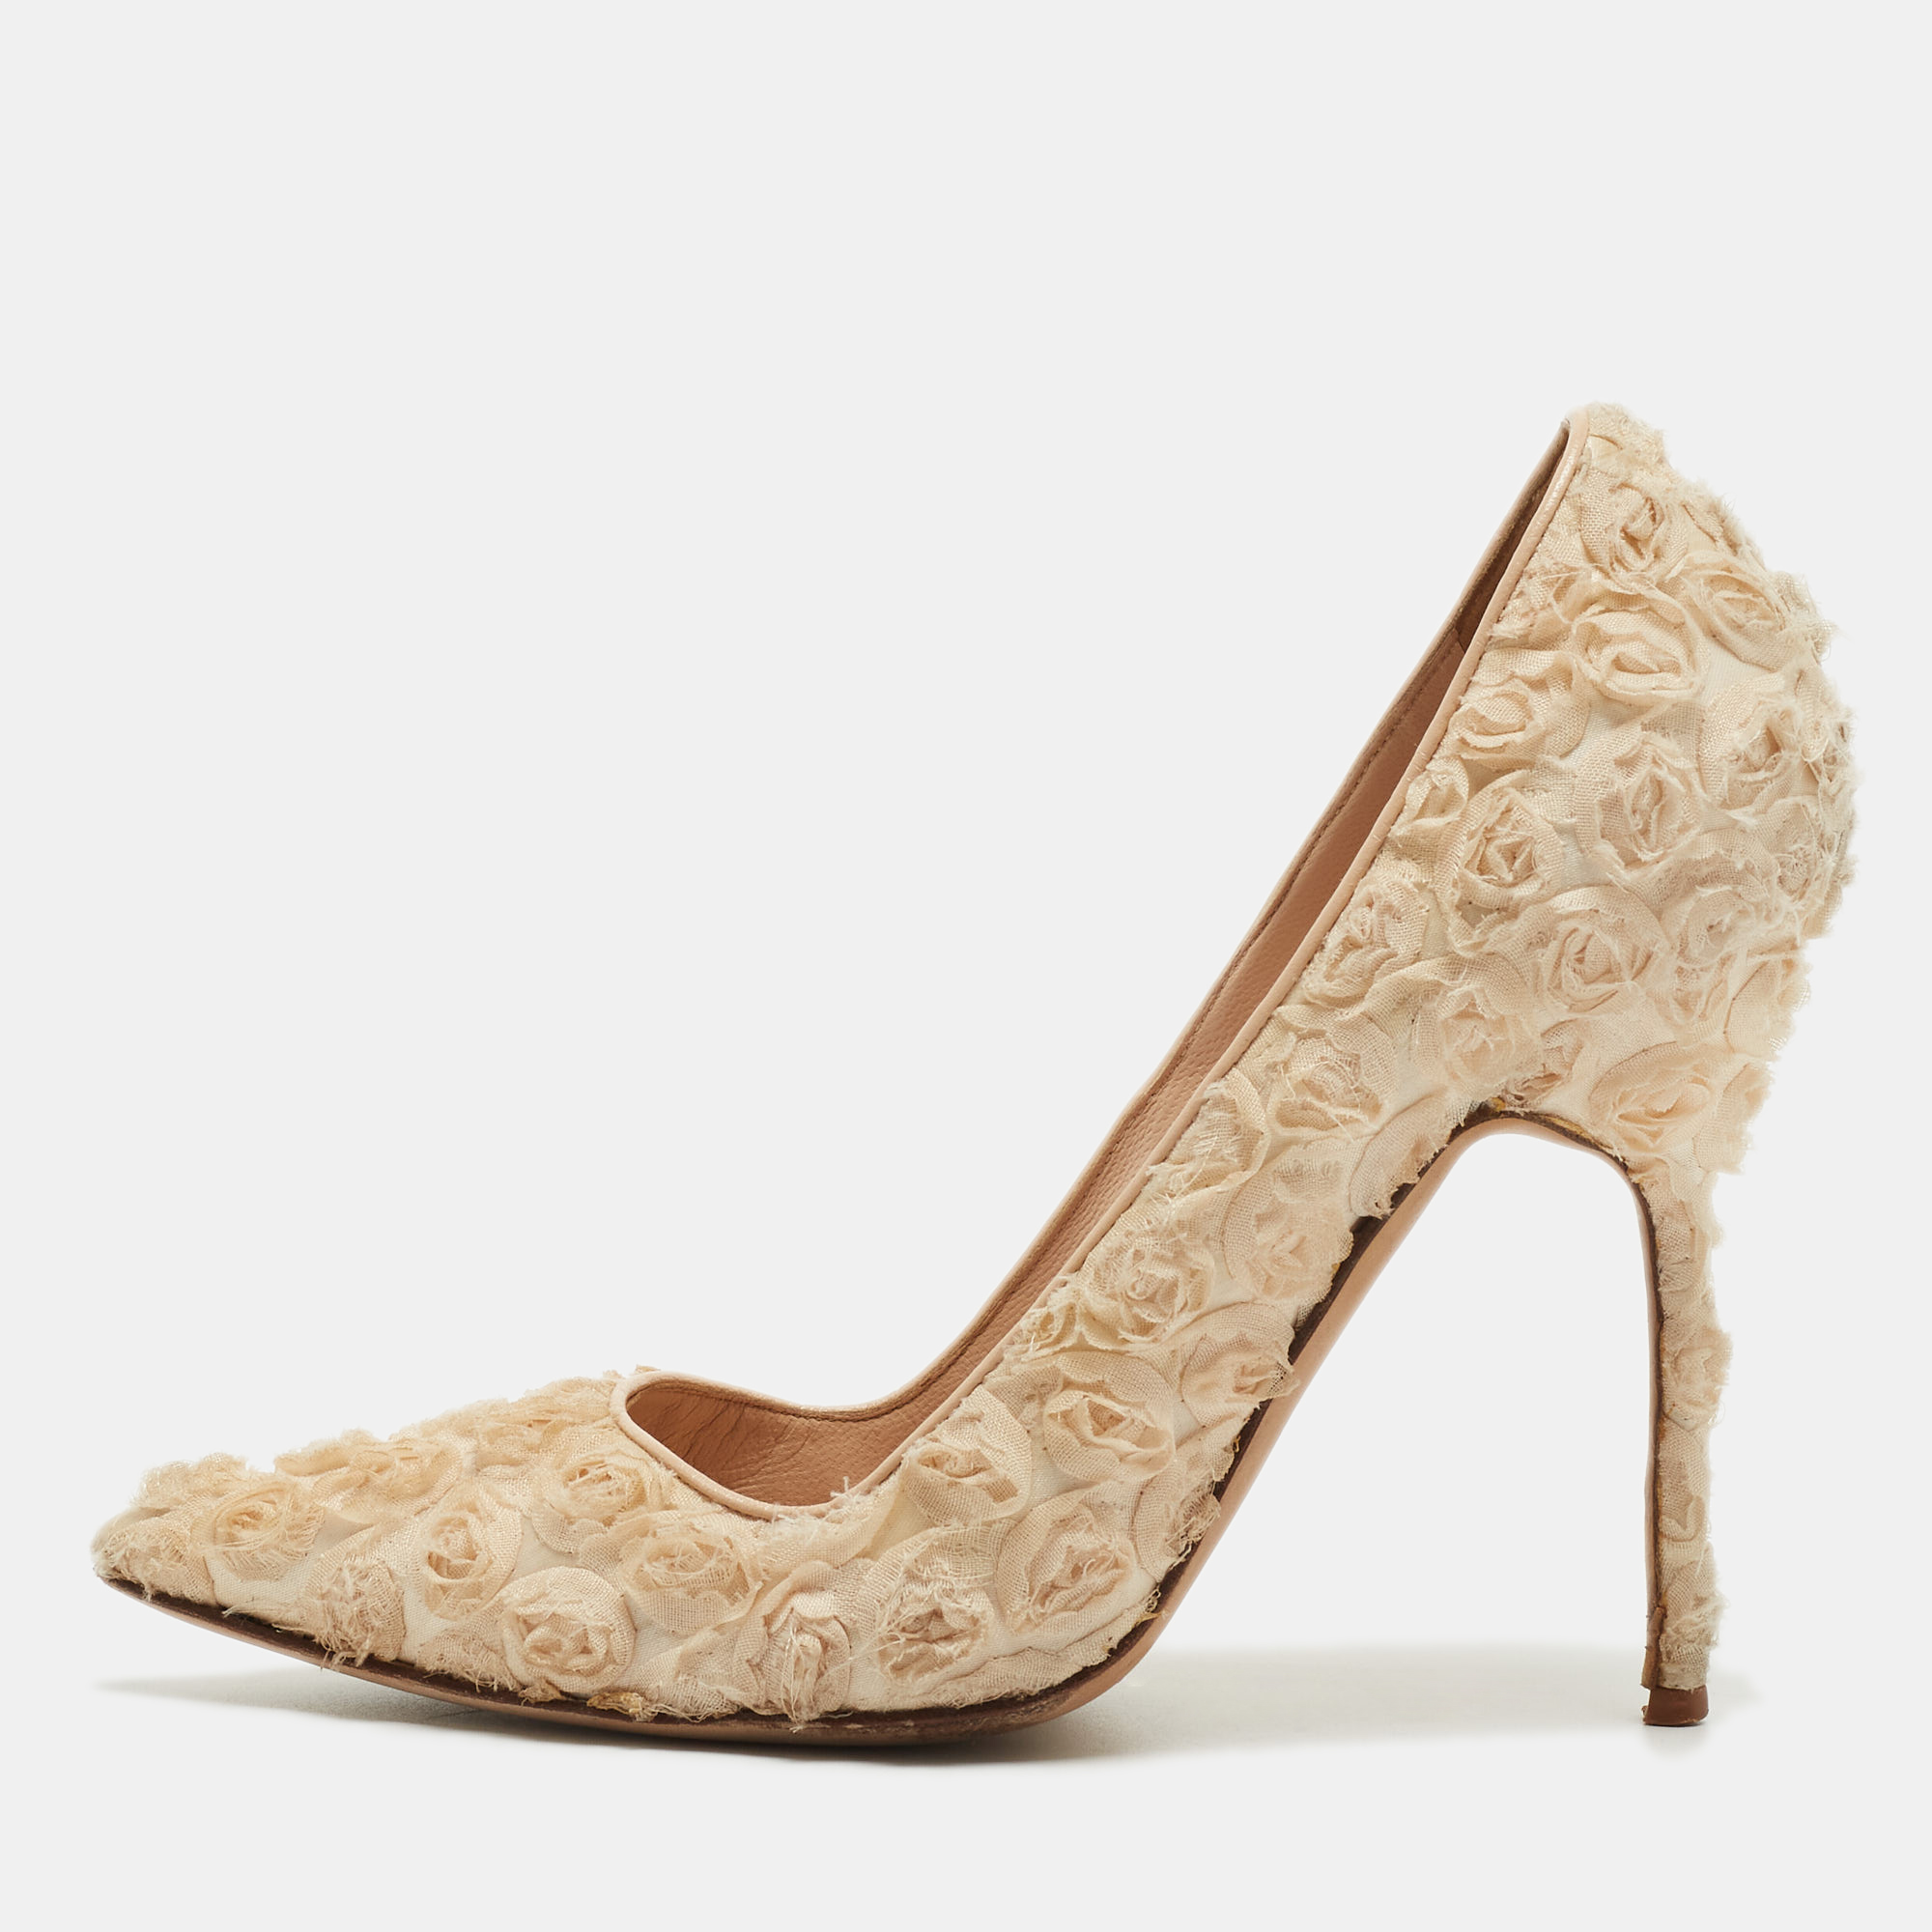 Manolo Blahnik Beige Floral Lace And Satin Pointed Toe Pumps Size 37